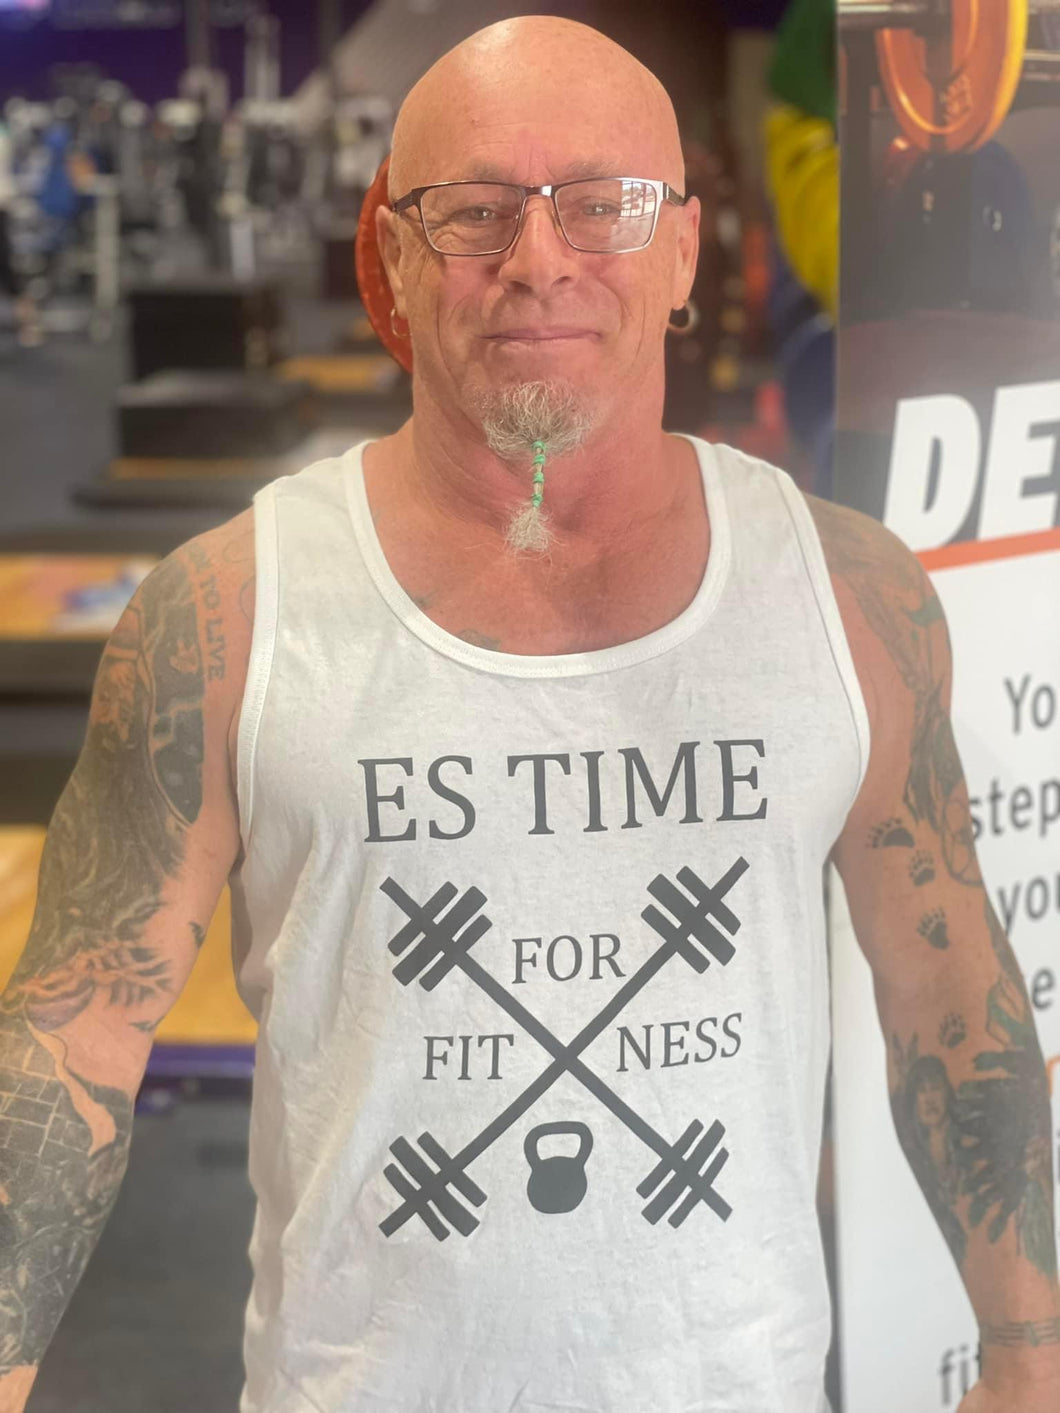 ES TIME FOR FITNESS  Tank Top  White Black Logo Different Sizes